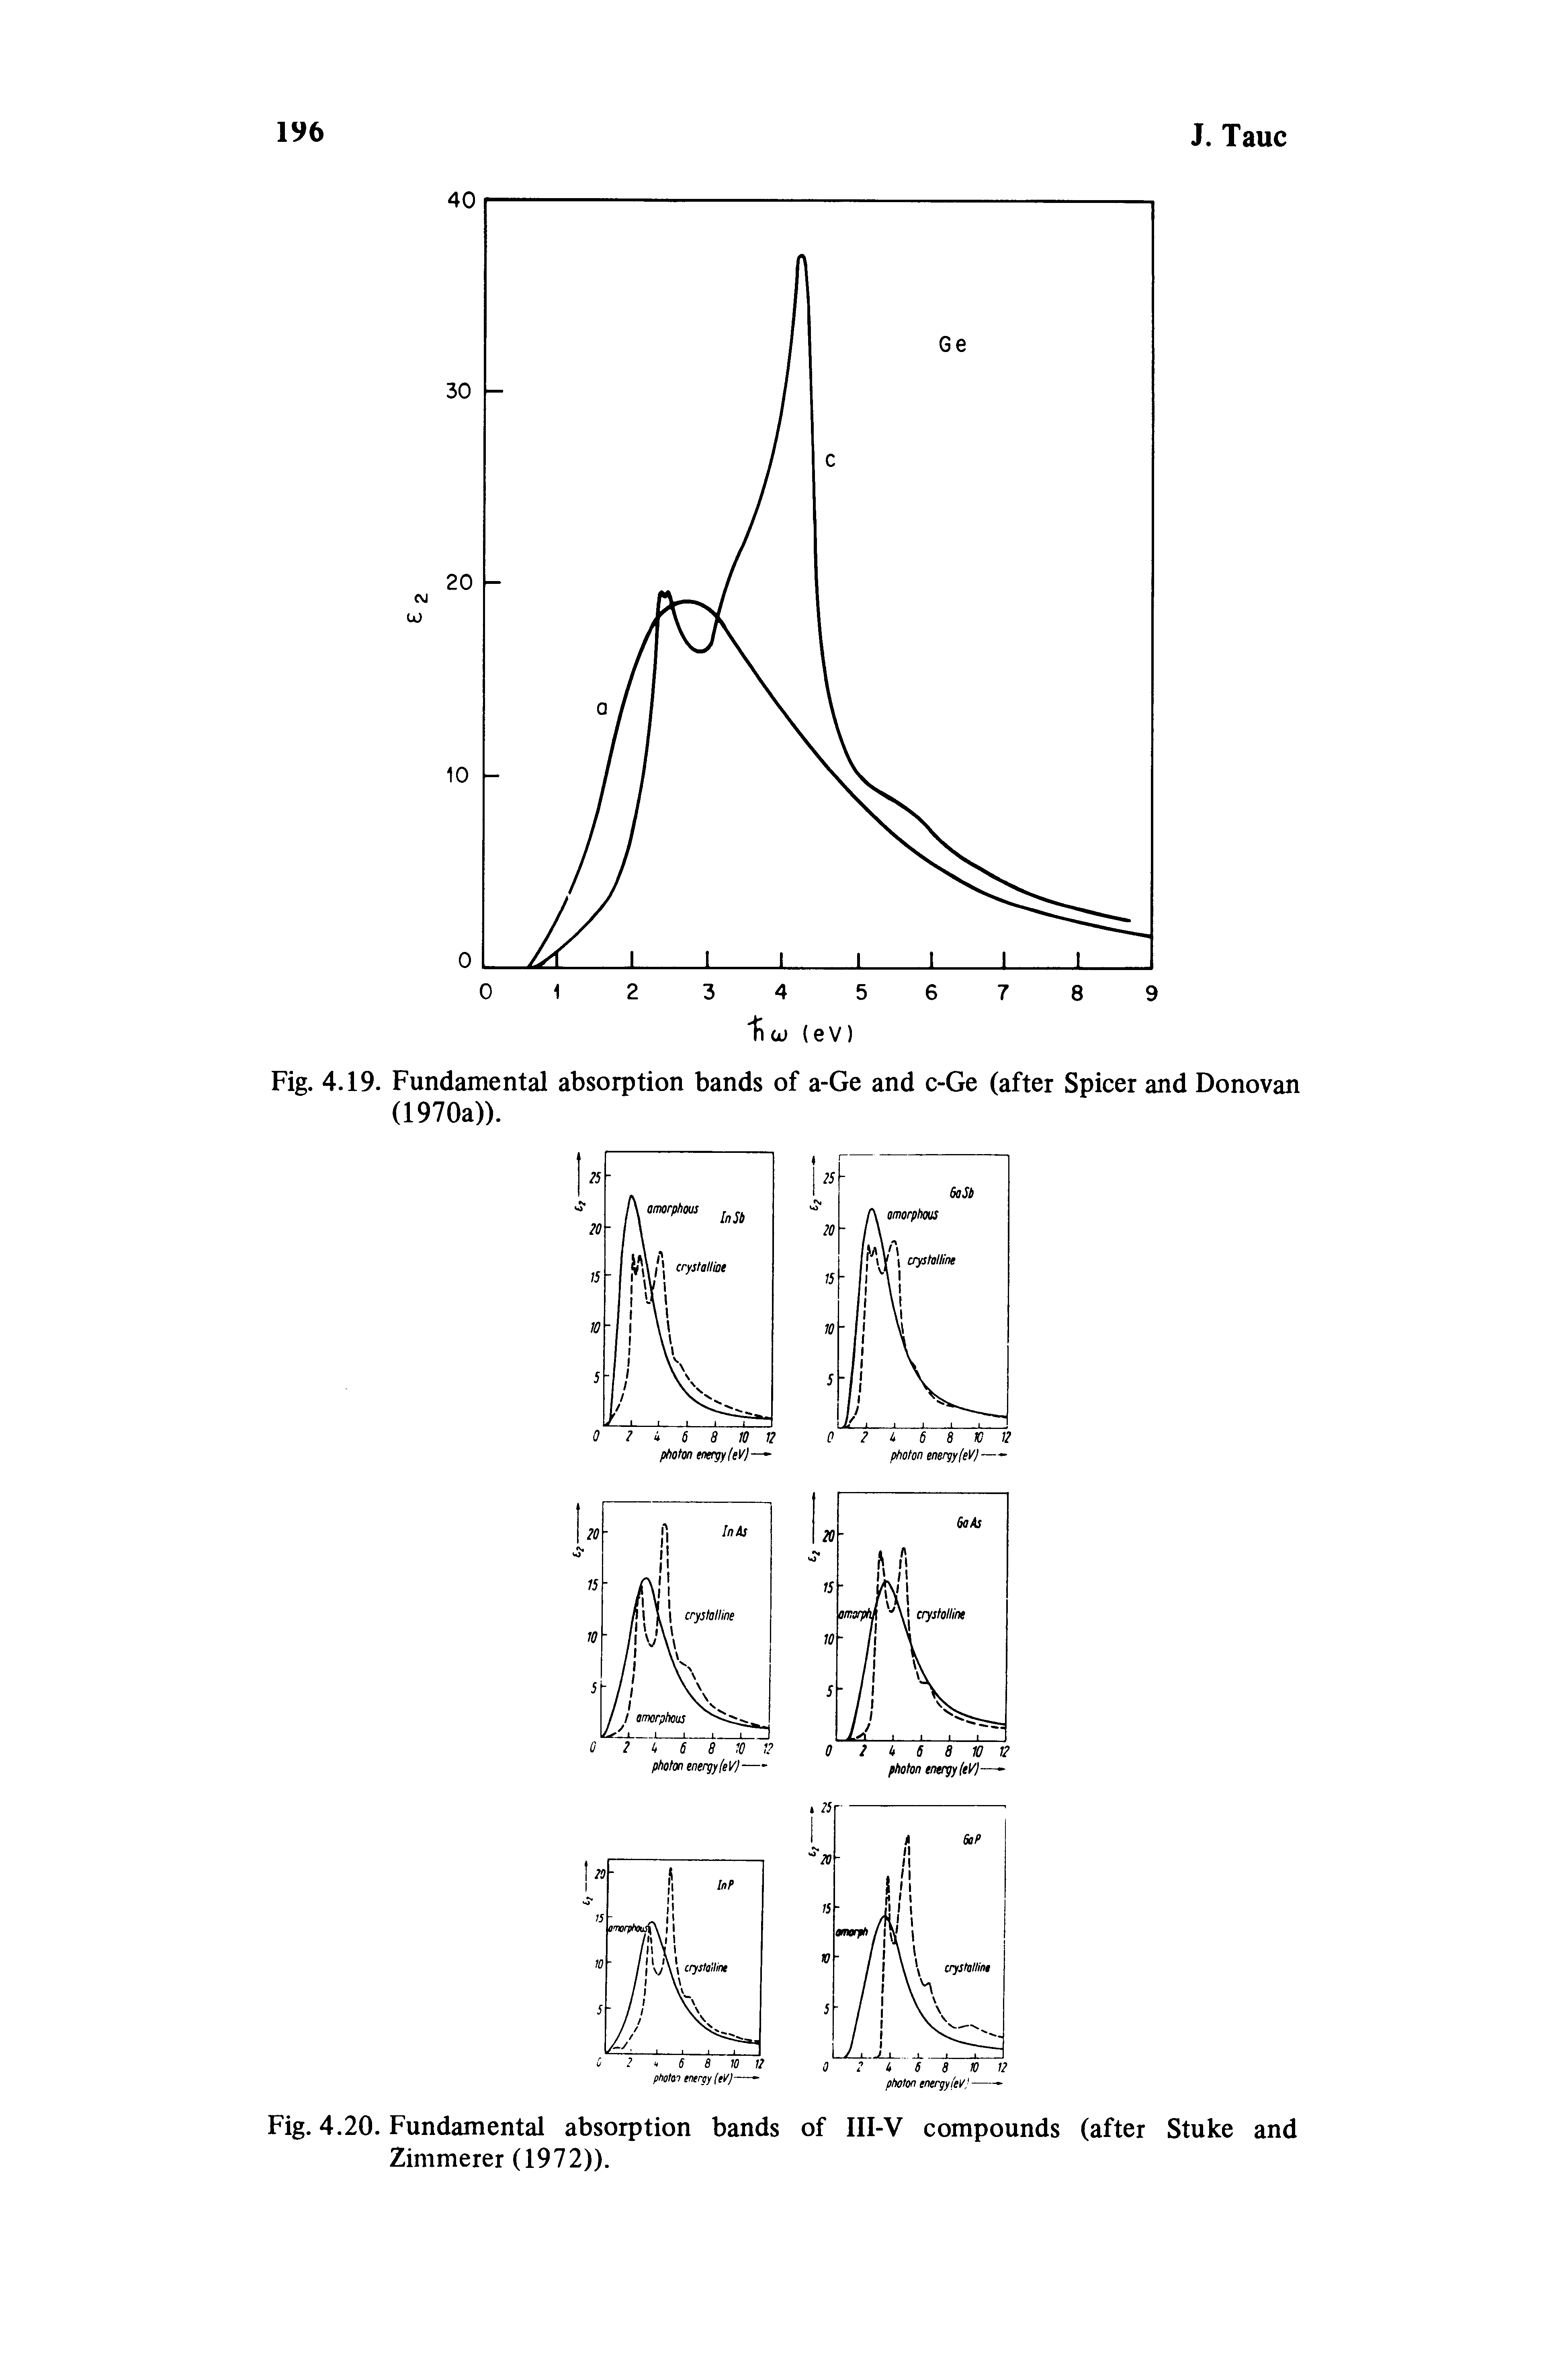 Fig. 4.19. Fundamental absorption bands of a-Ge and c-Ge (after Spicer and Donovan (1970a)).